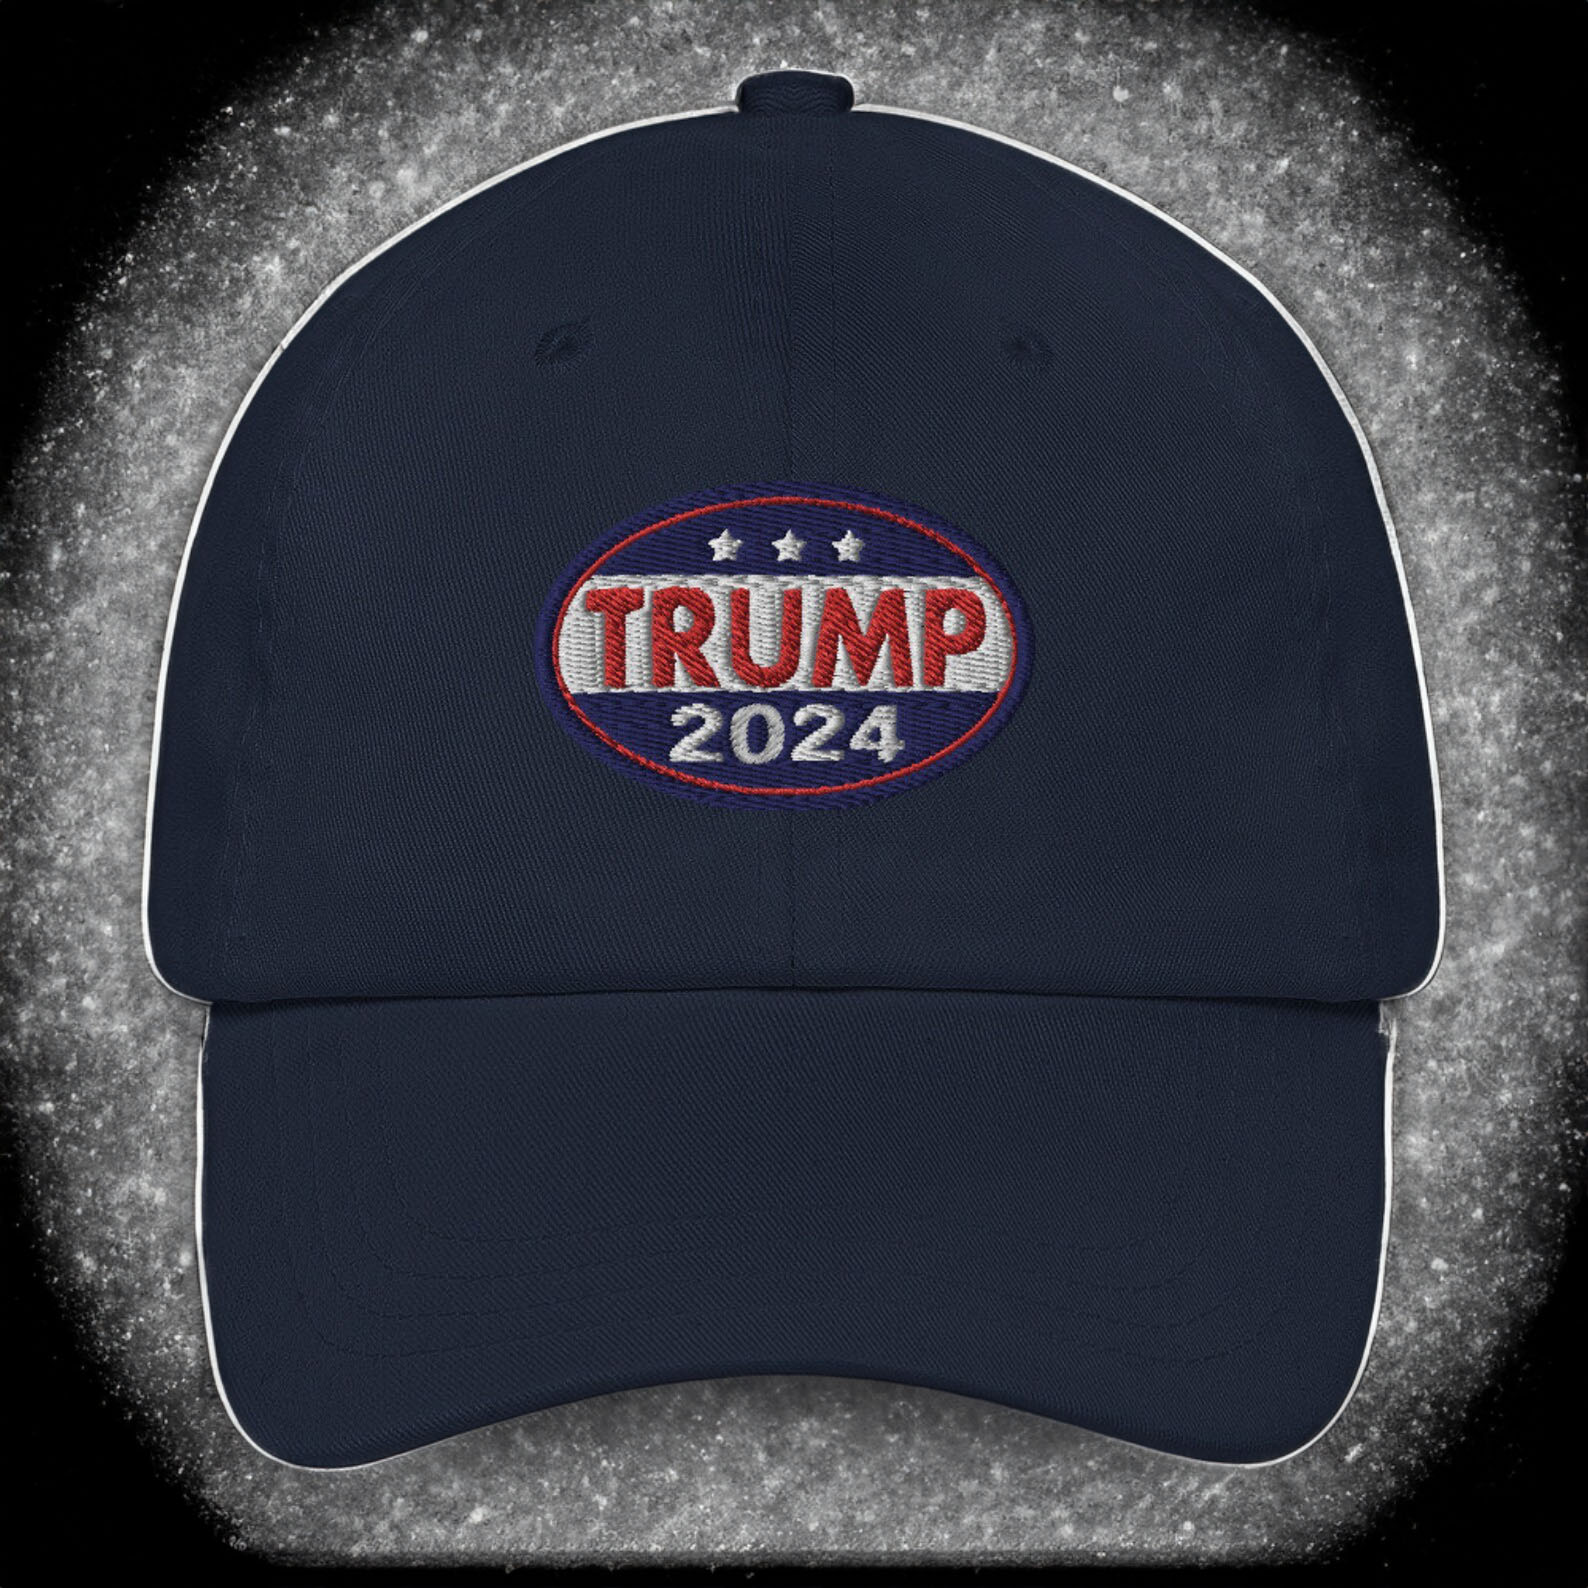 Trump 2024 Presidential Campaign Embroidered Adjustable Baseball Caps Dad Hat